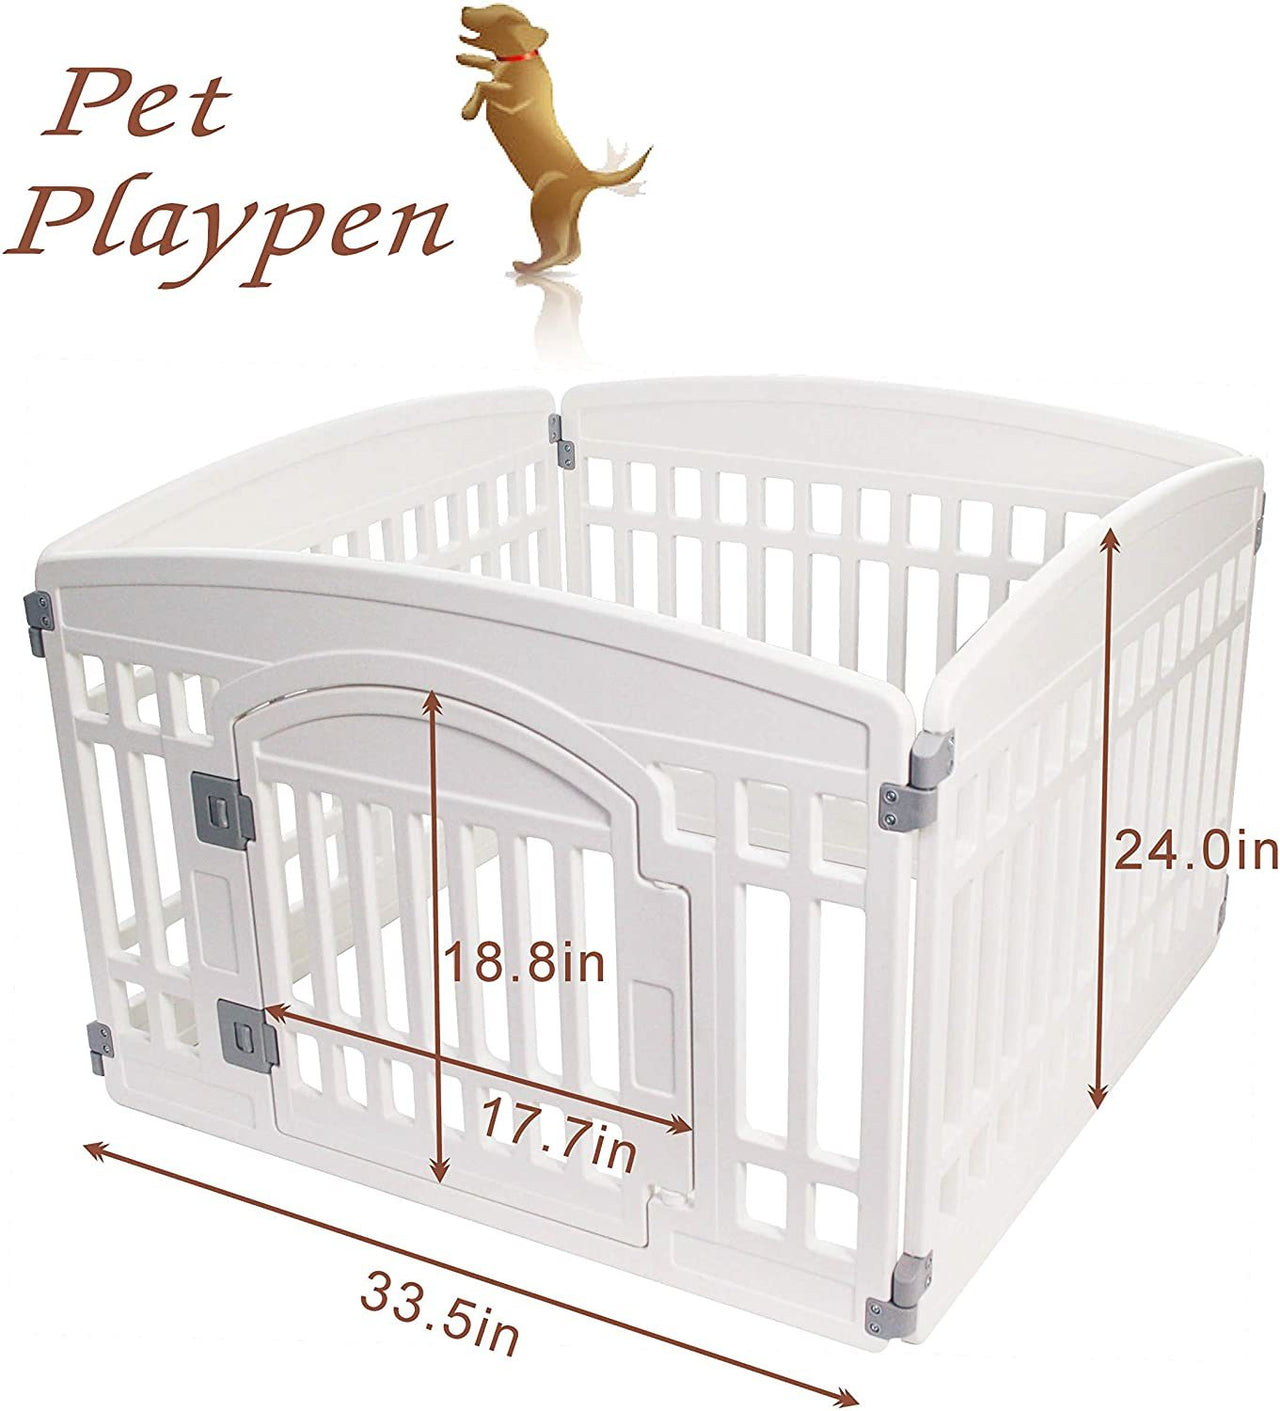 Pet playpen foldable gate for dogs